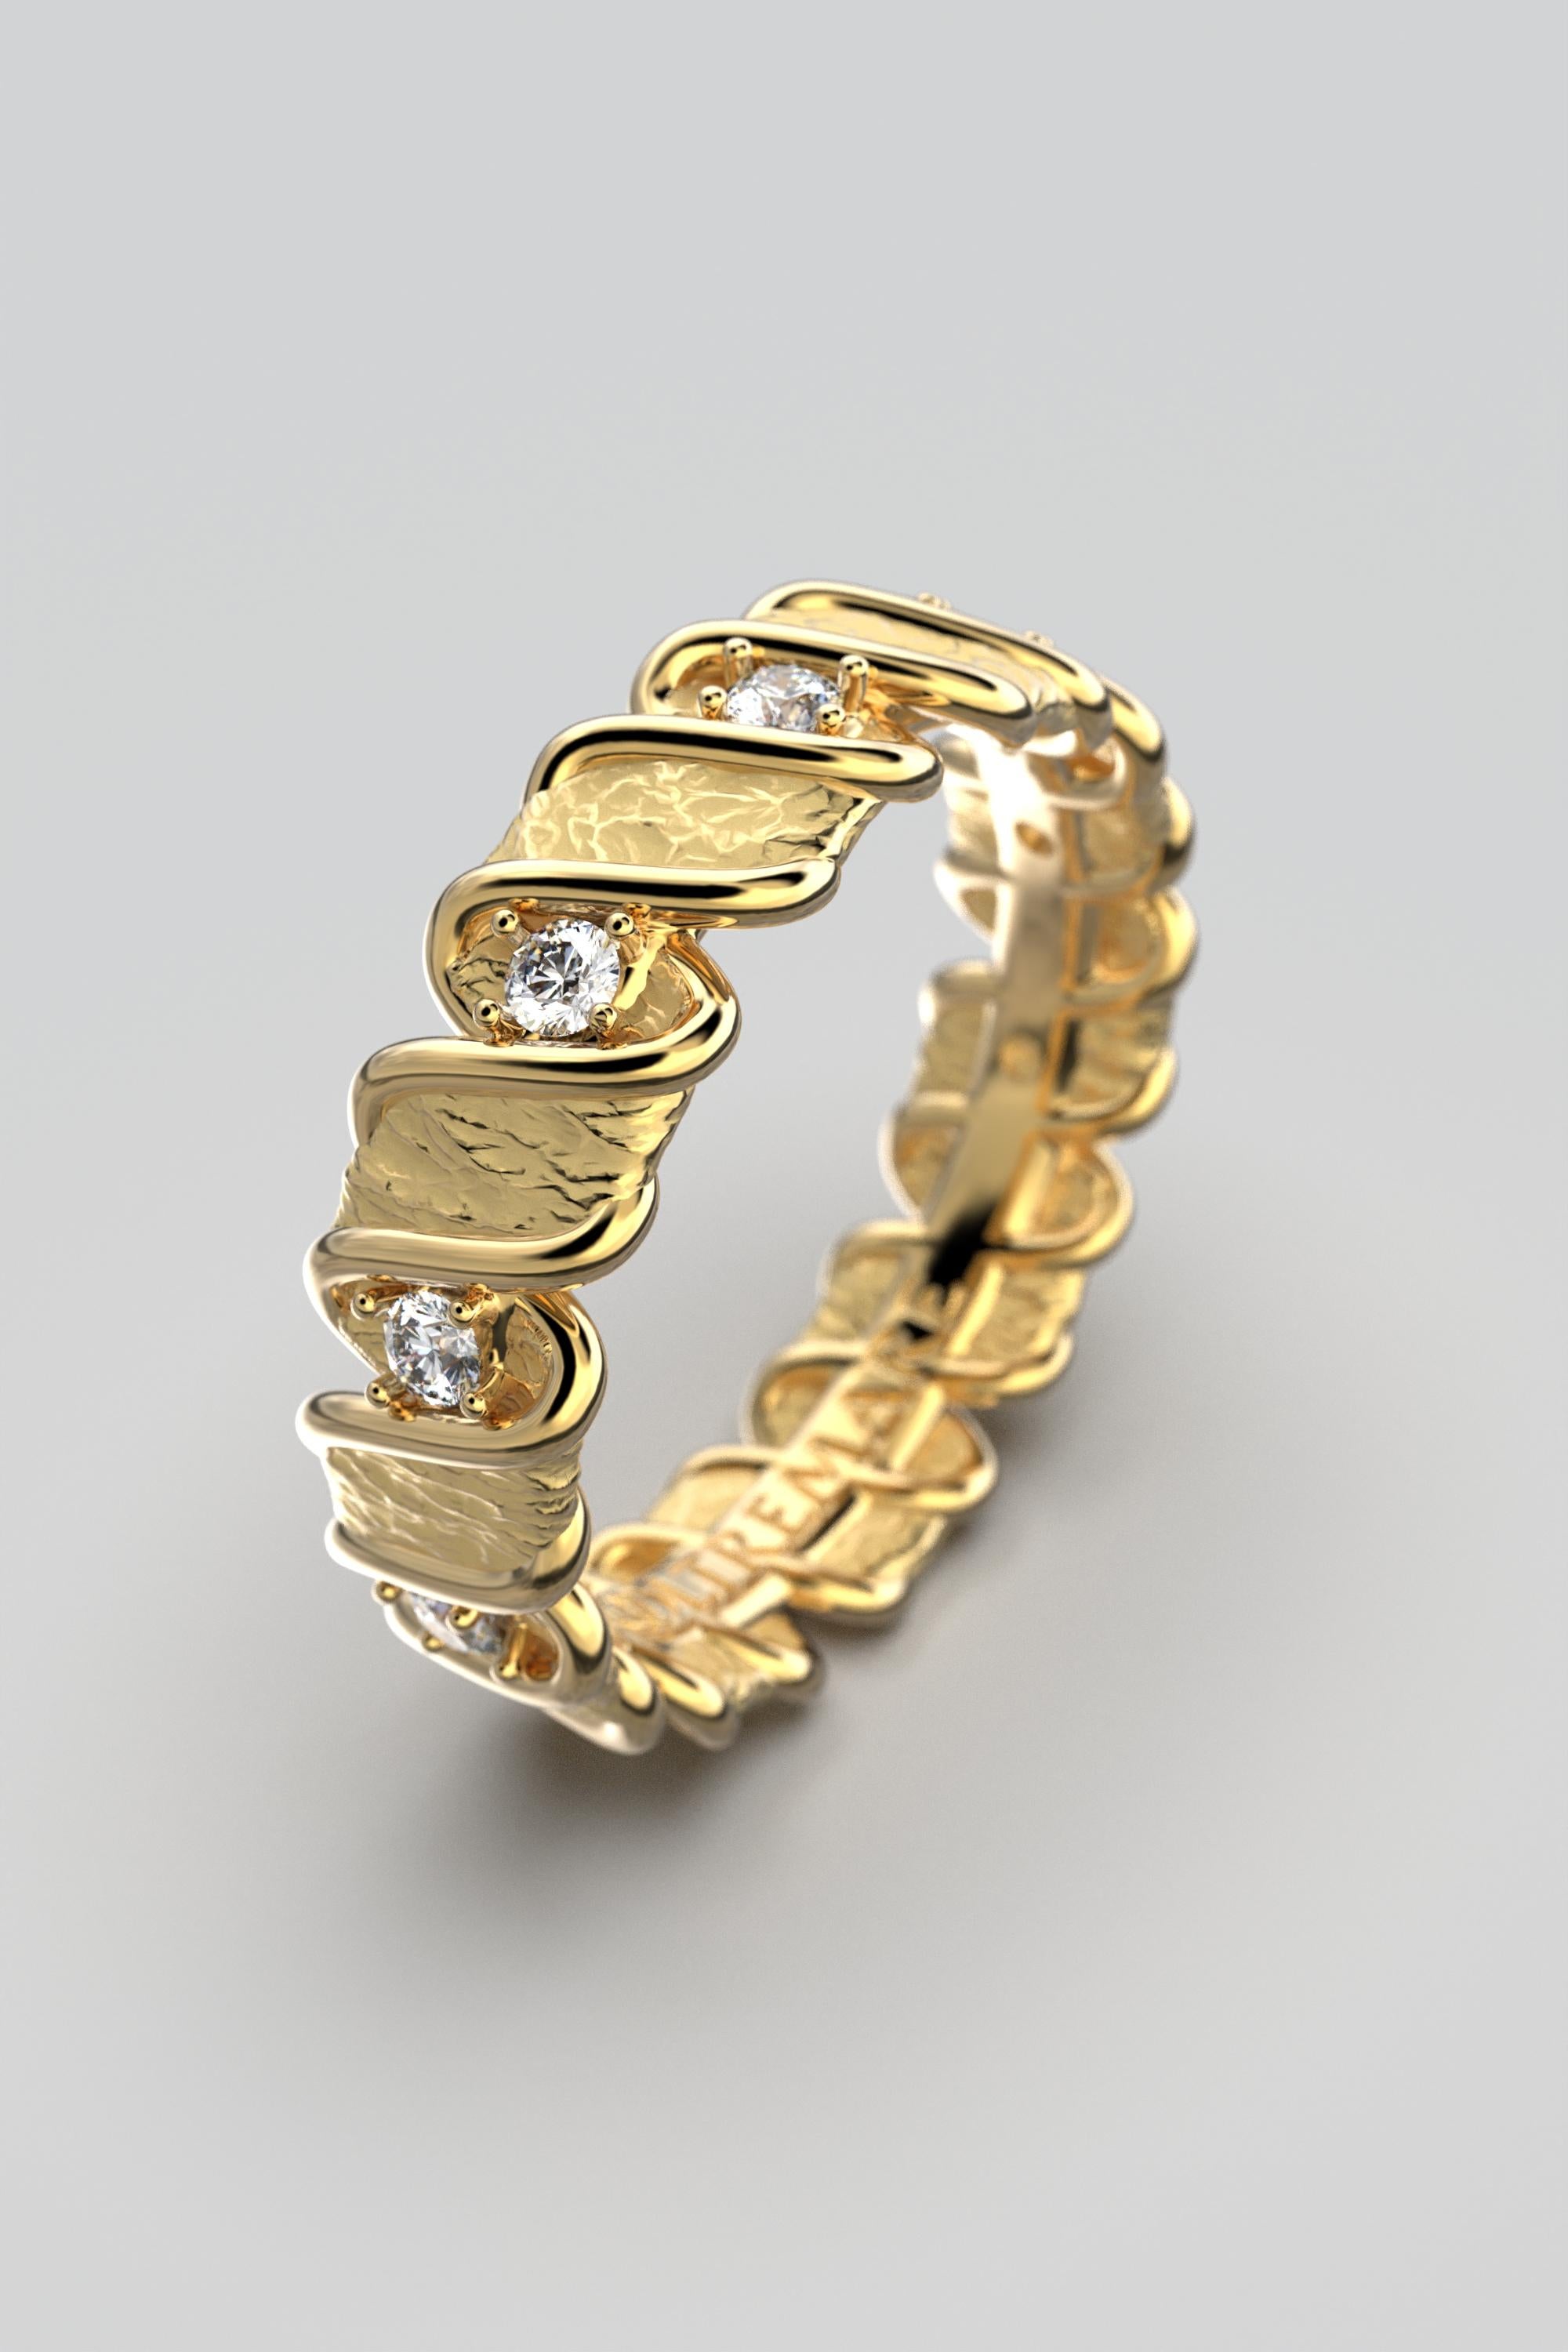 For Sale:  Italian Diamond Eternity Gold Band Made in Italy in 18k By Oltremare Gioielli 9